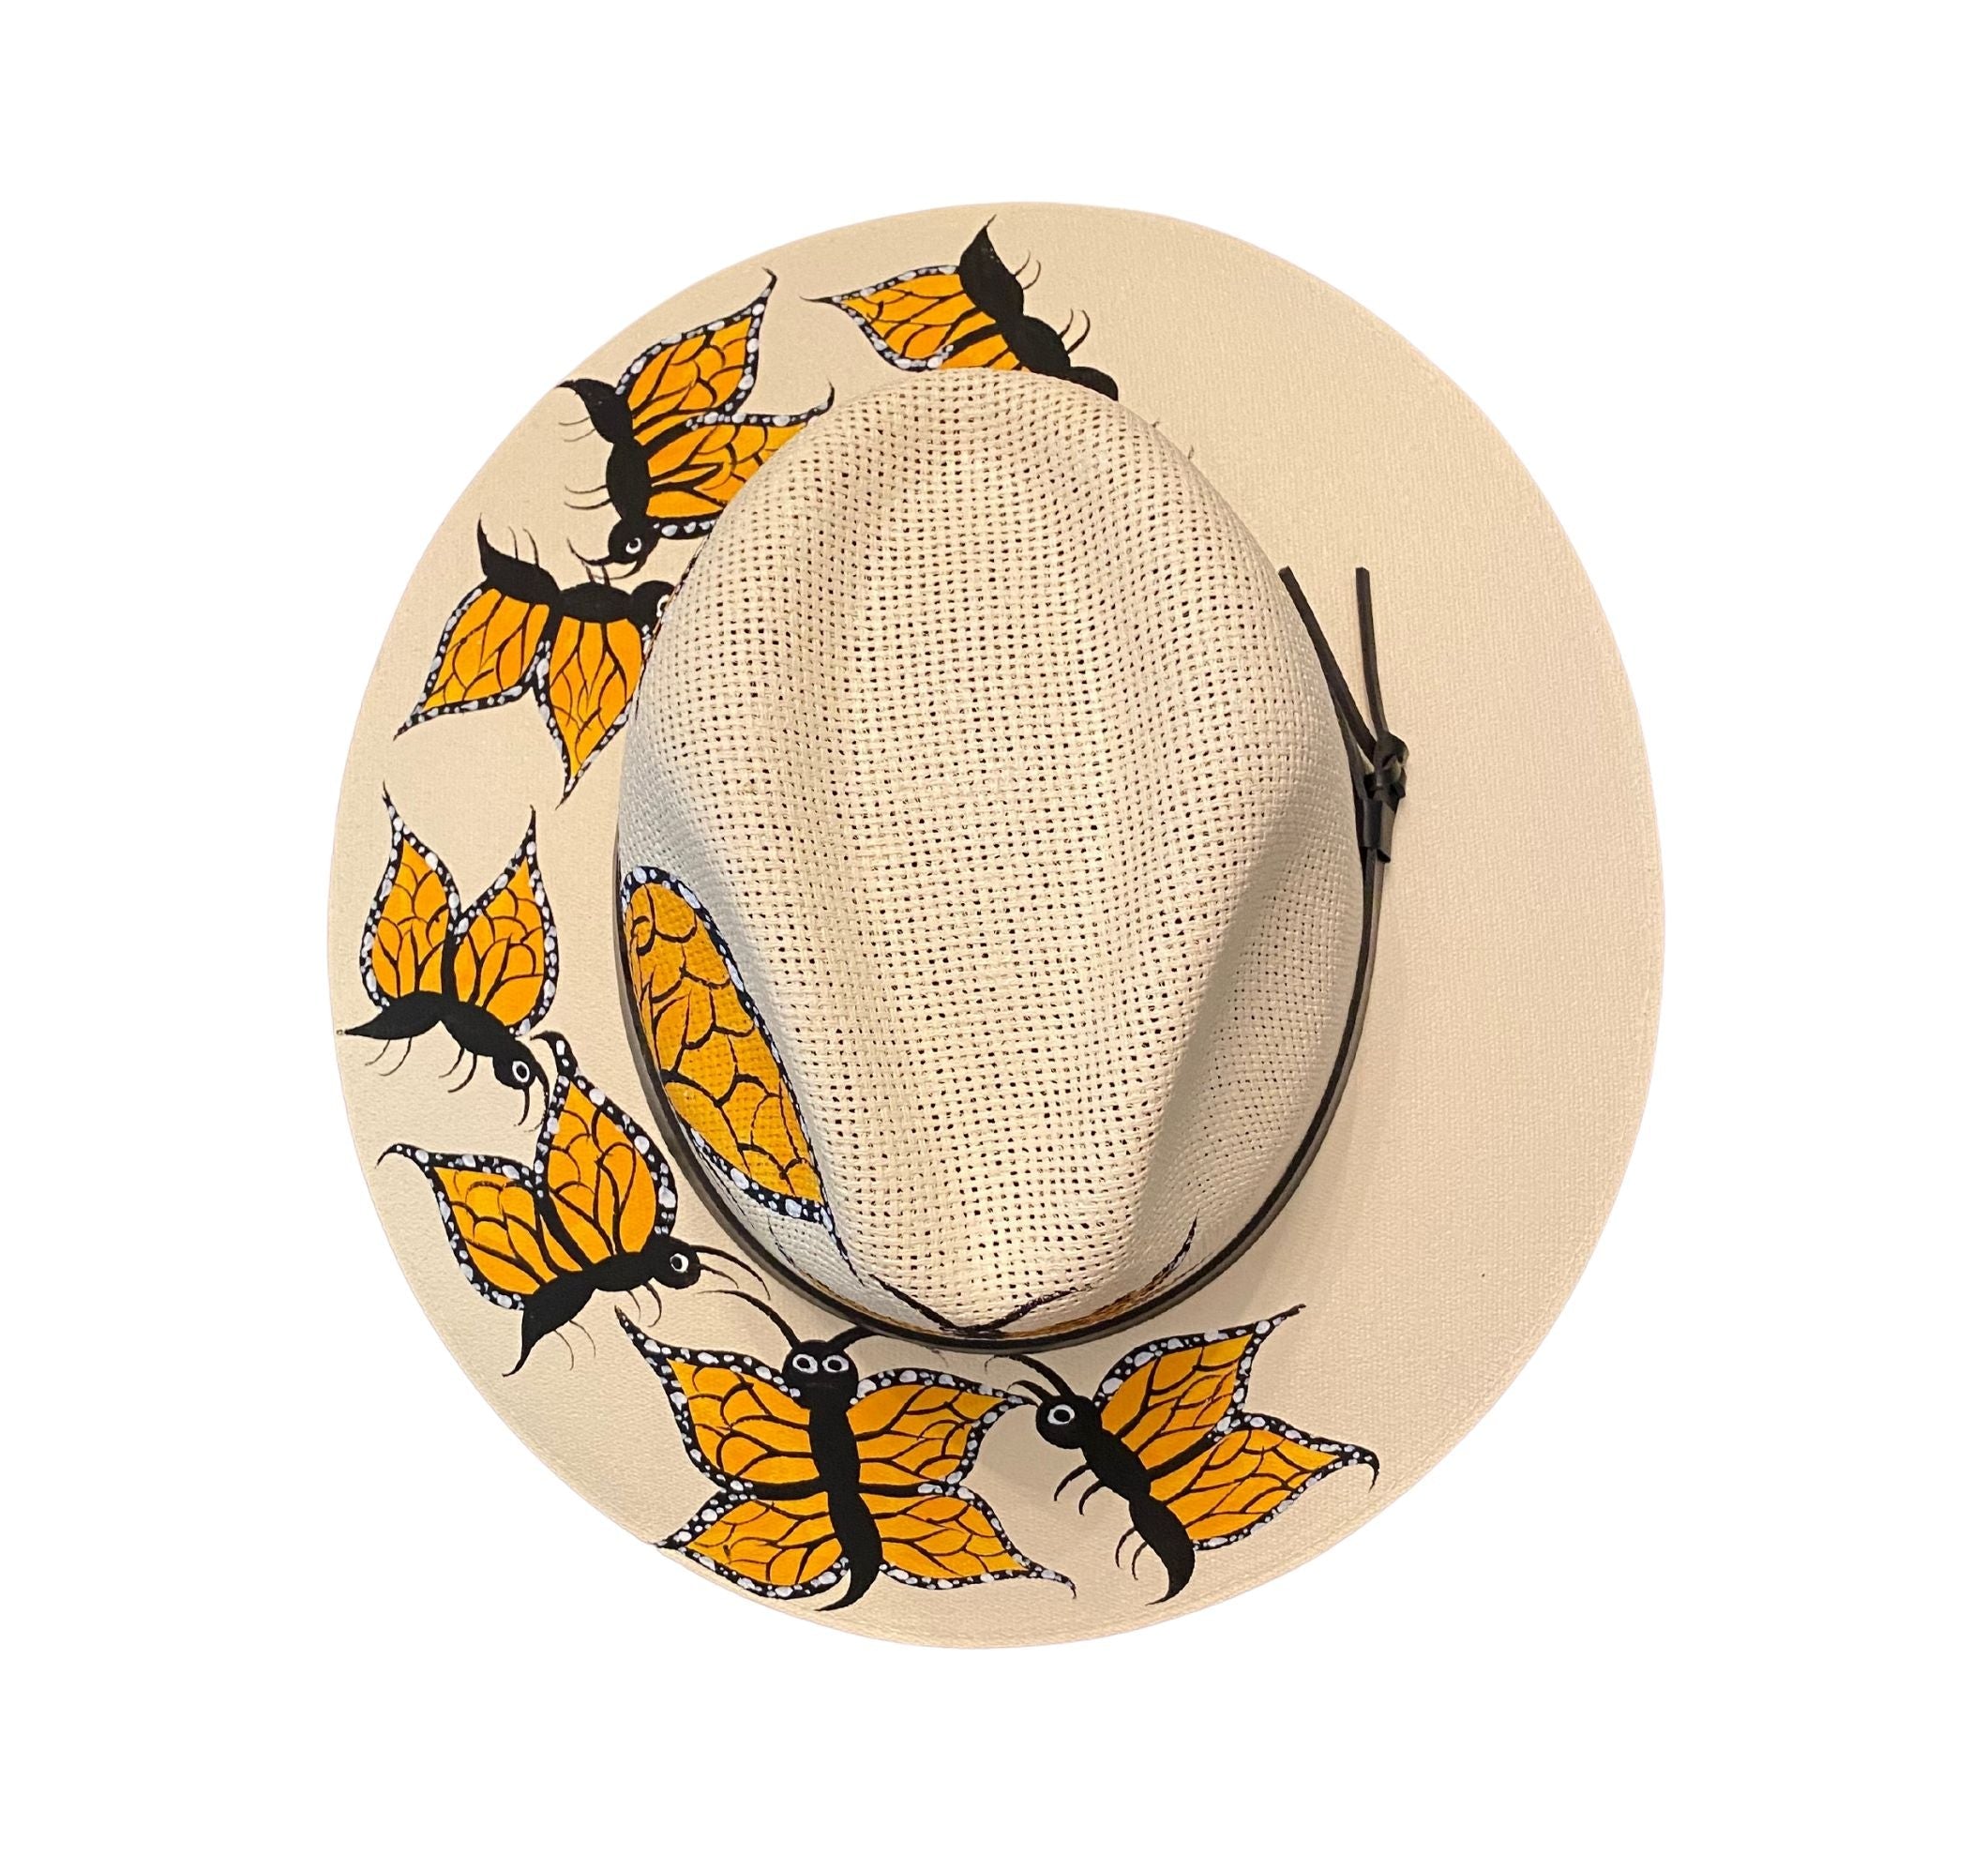 Hand-painted Hat from Mexico - Butterflies - White, Yellow, Black by Larkin Lane